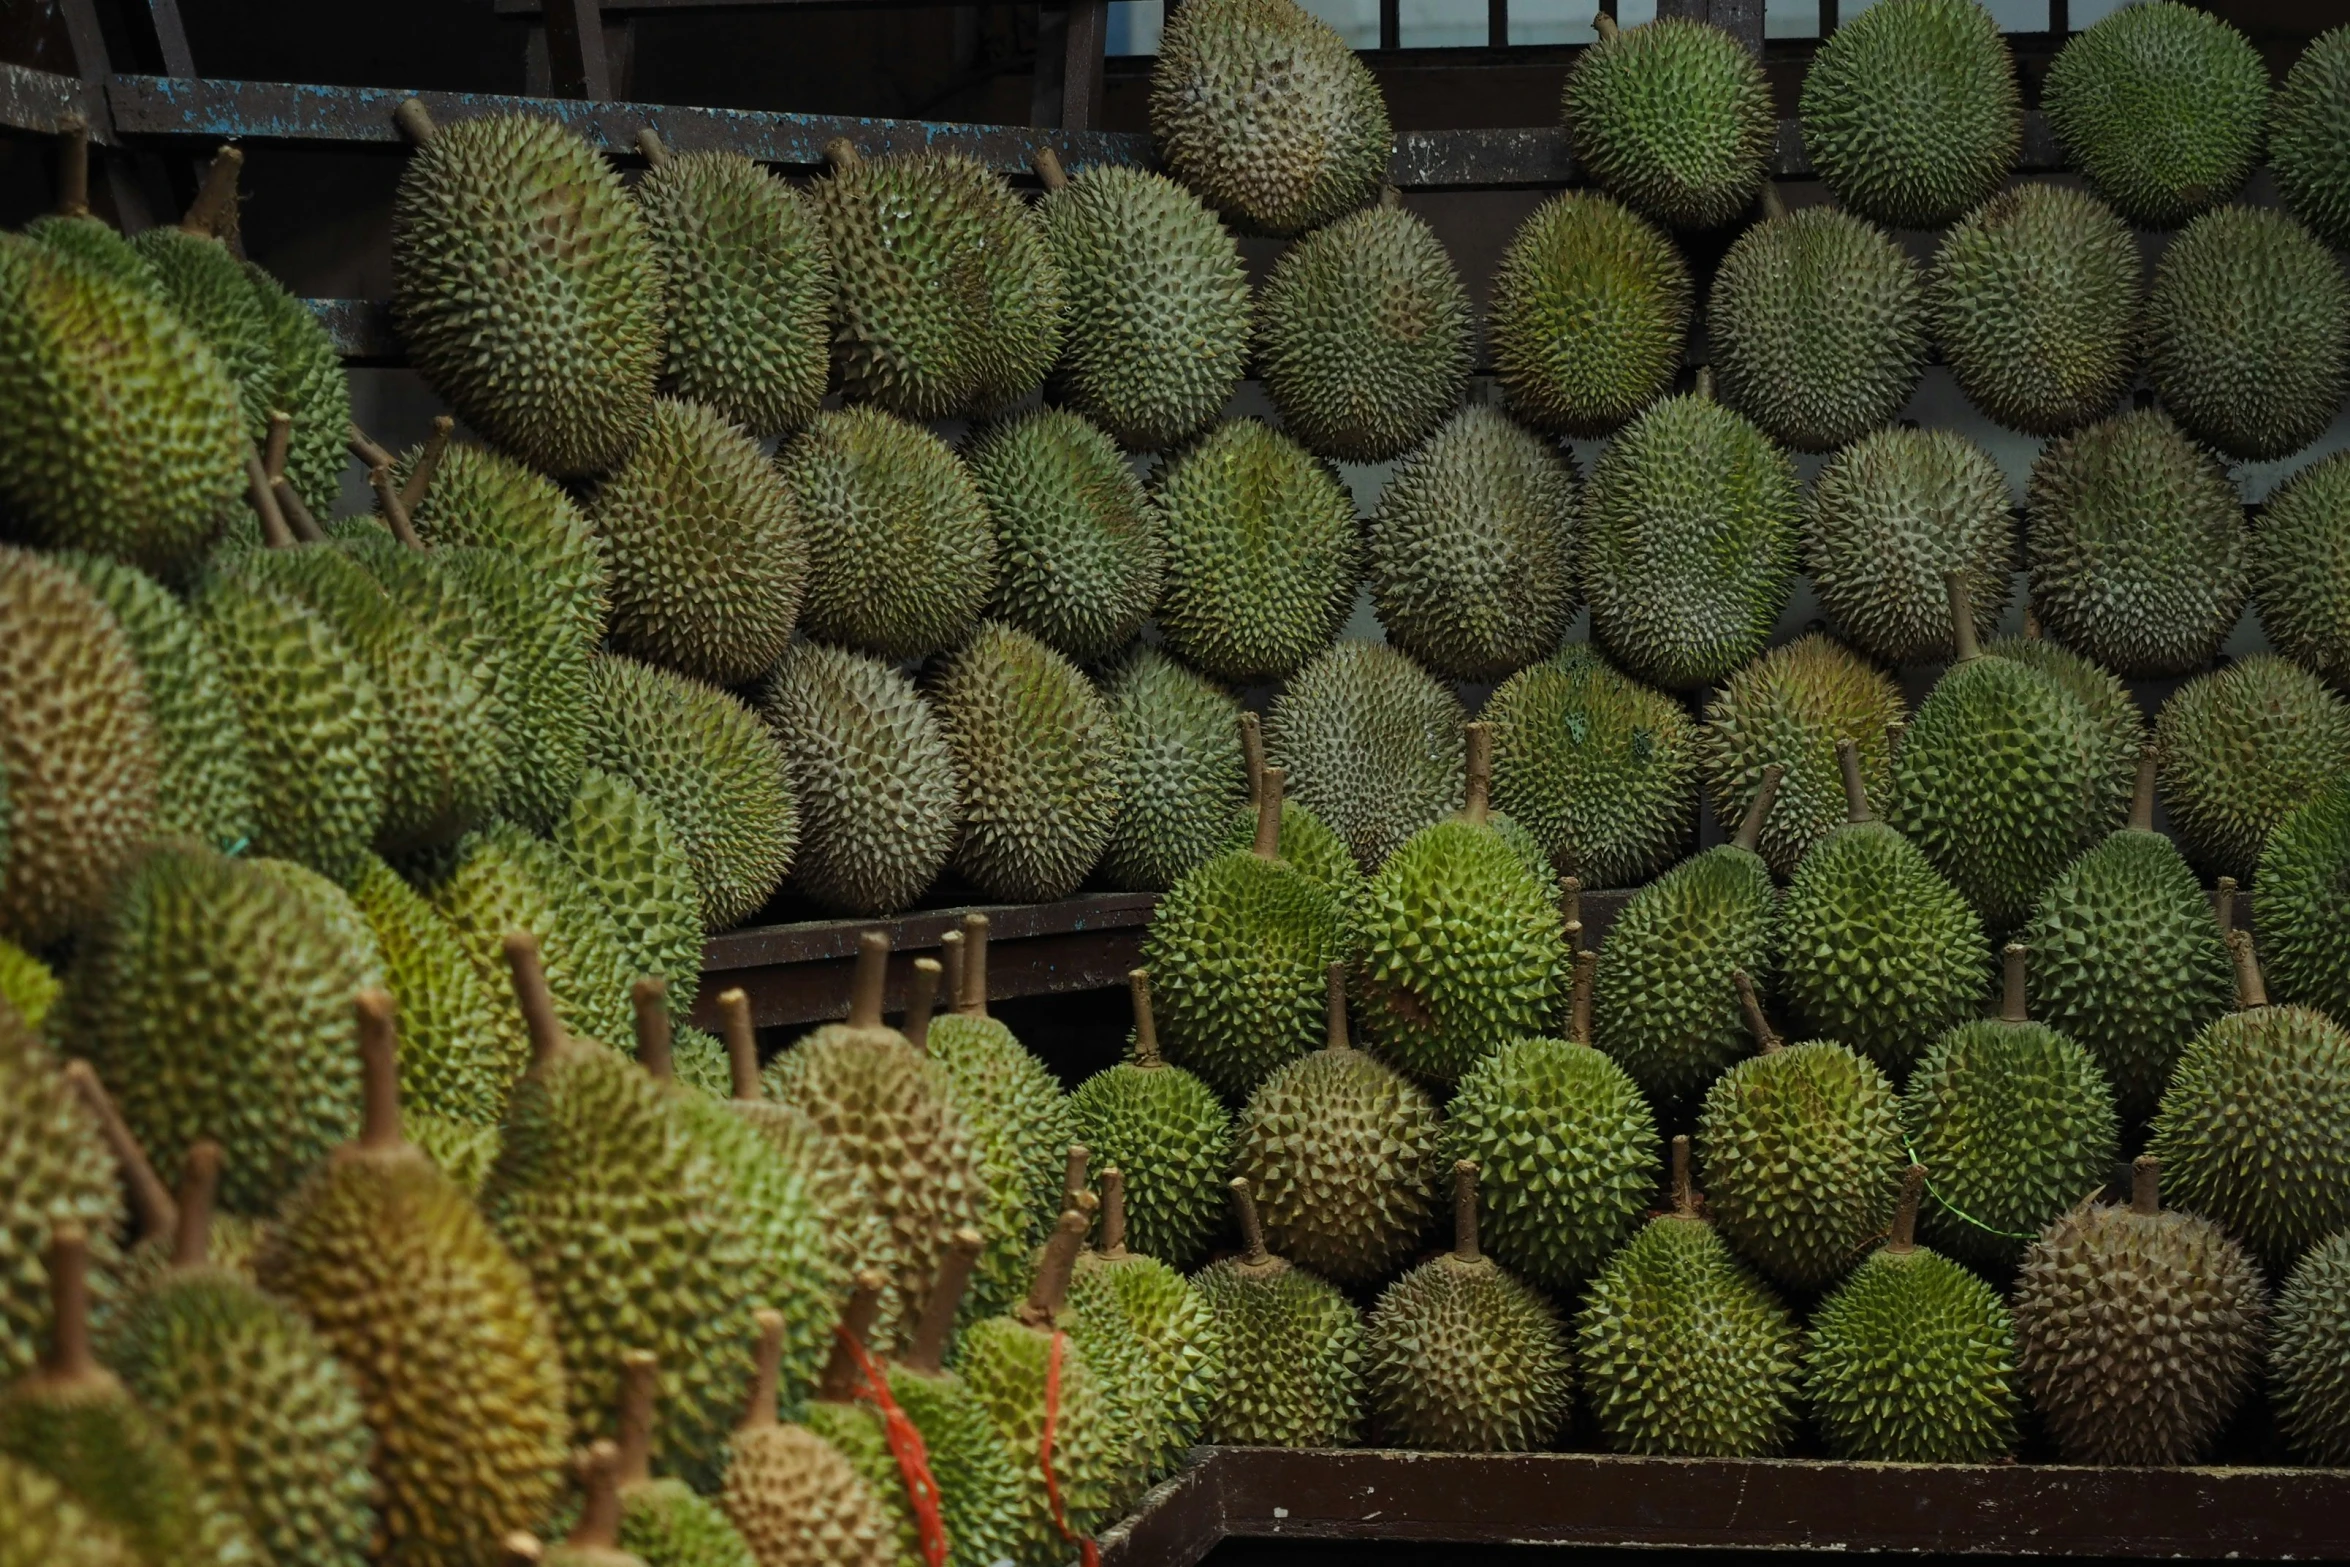 a truck filled with lots of durians next to each other